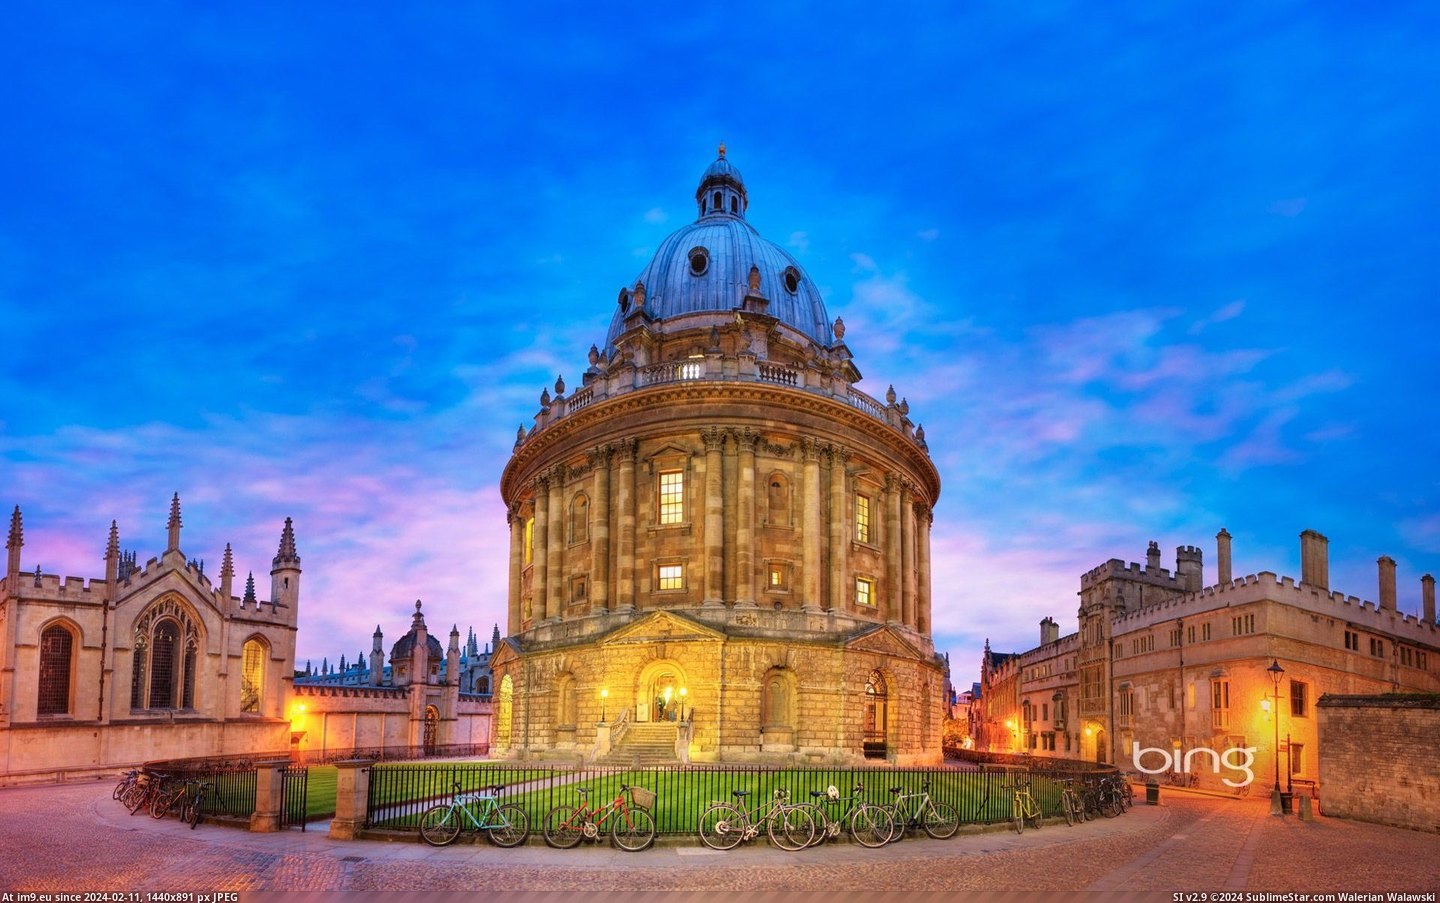 Radcliffe Camera, Oxford, England (© Corbis) (in Best photos of February 2013)